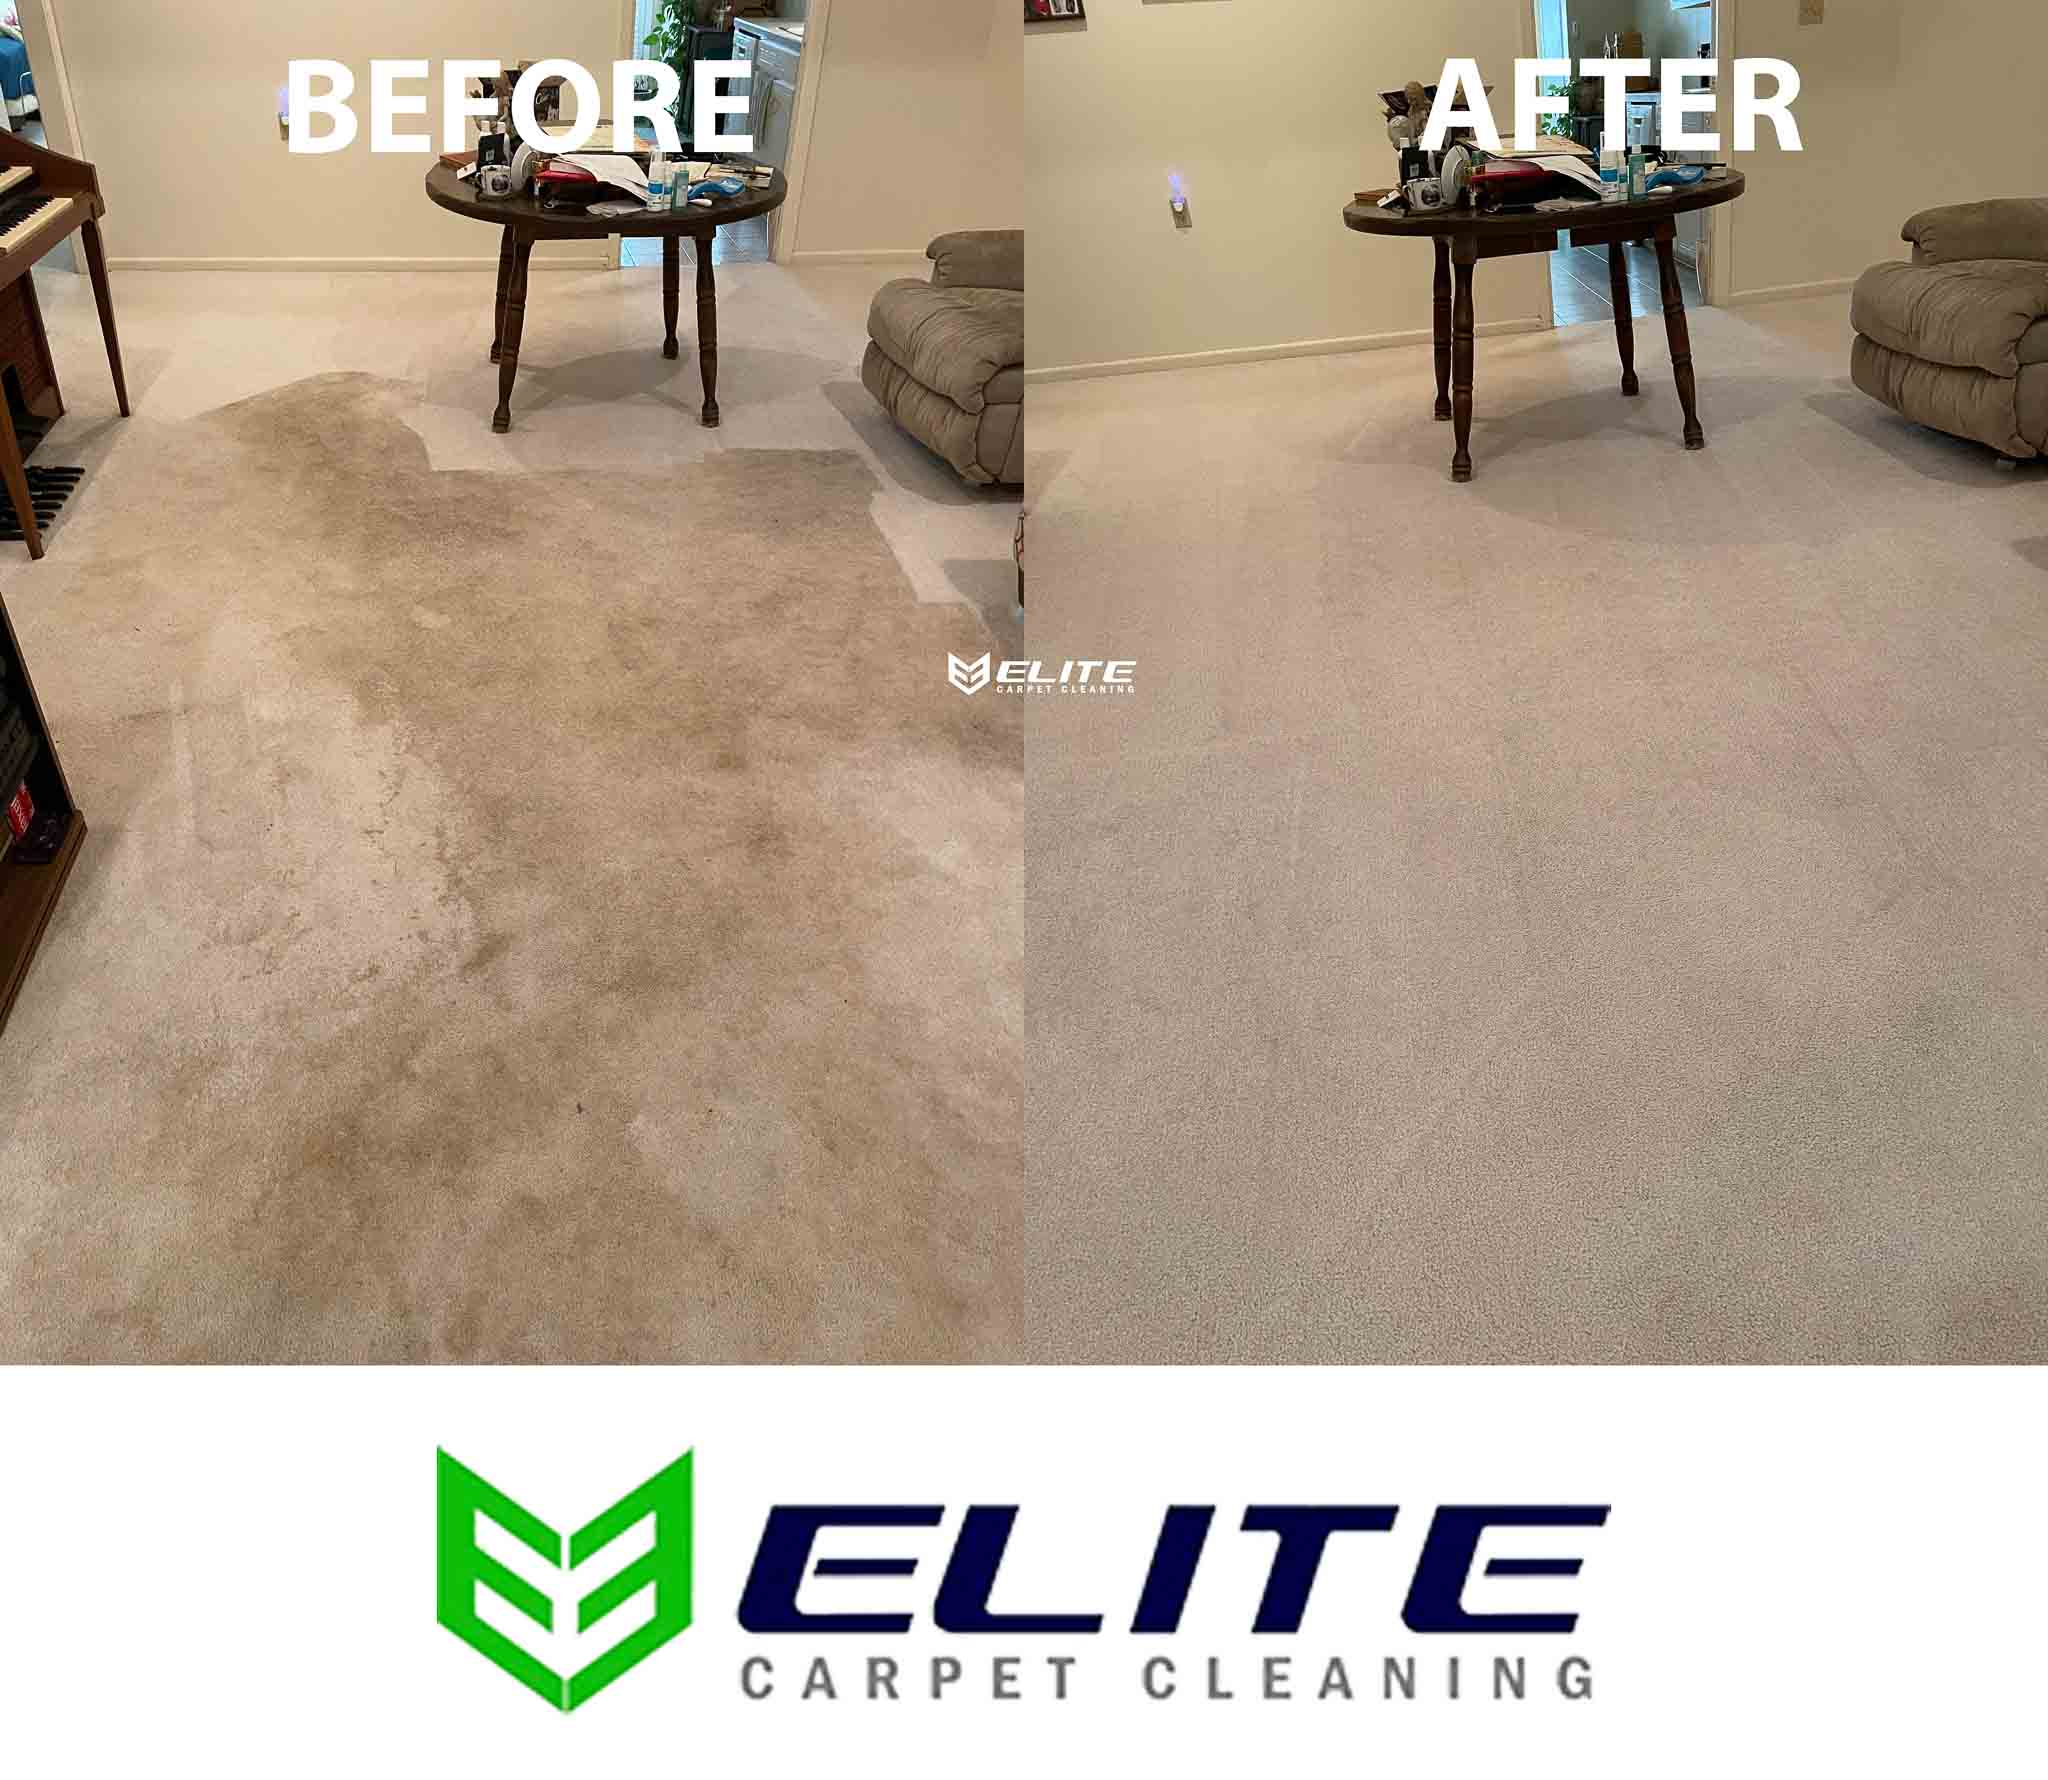 White carpet cleaned before and after in Fort Stockton Tx